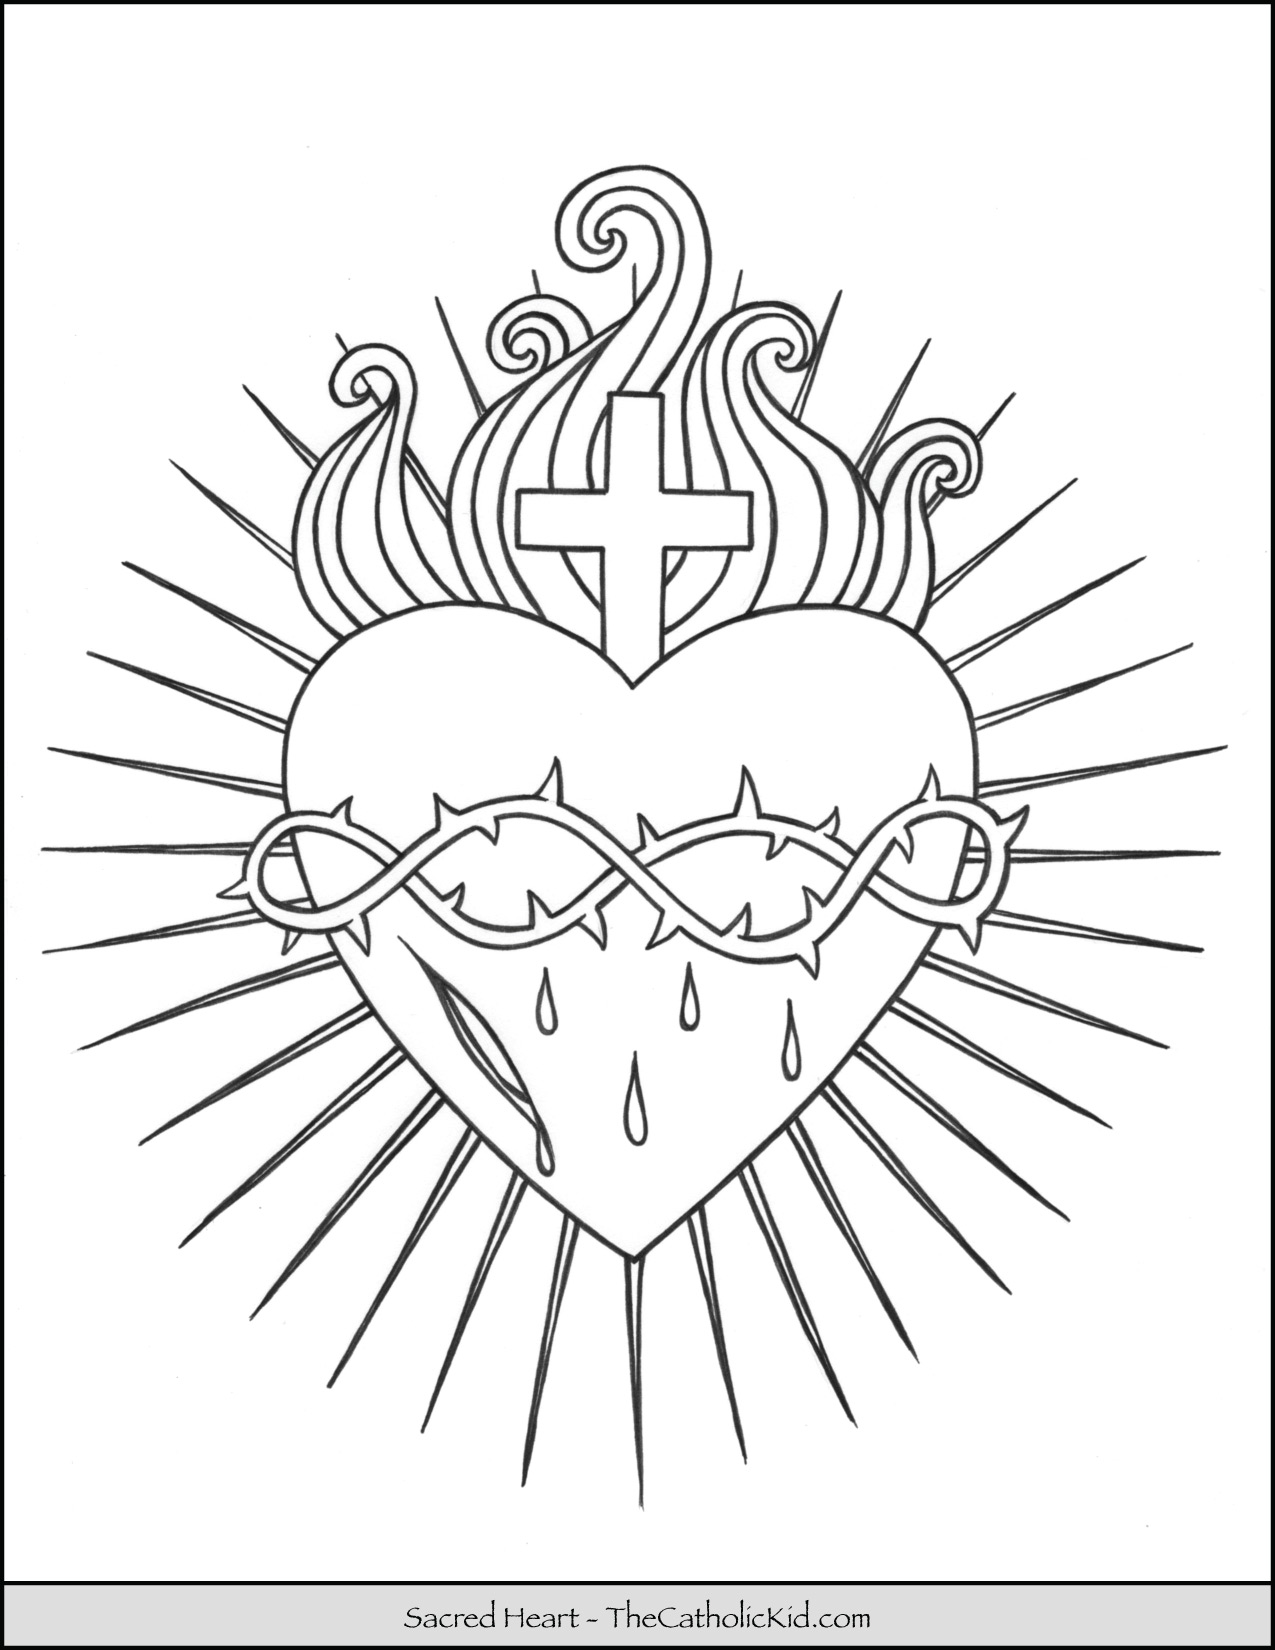 Sacred Heart Coloring Page - TheCatholicKid.com